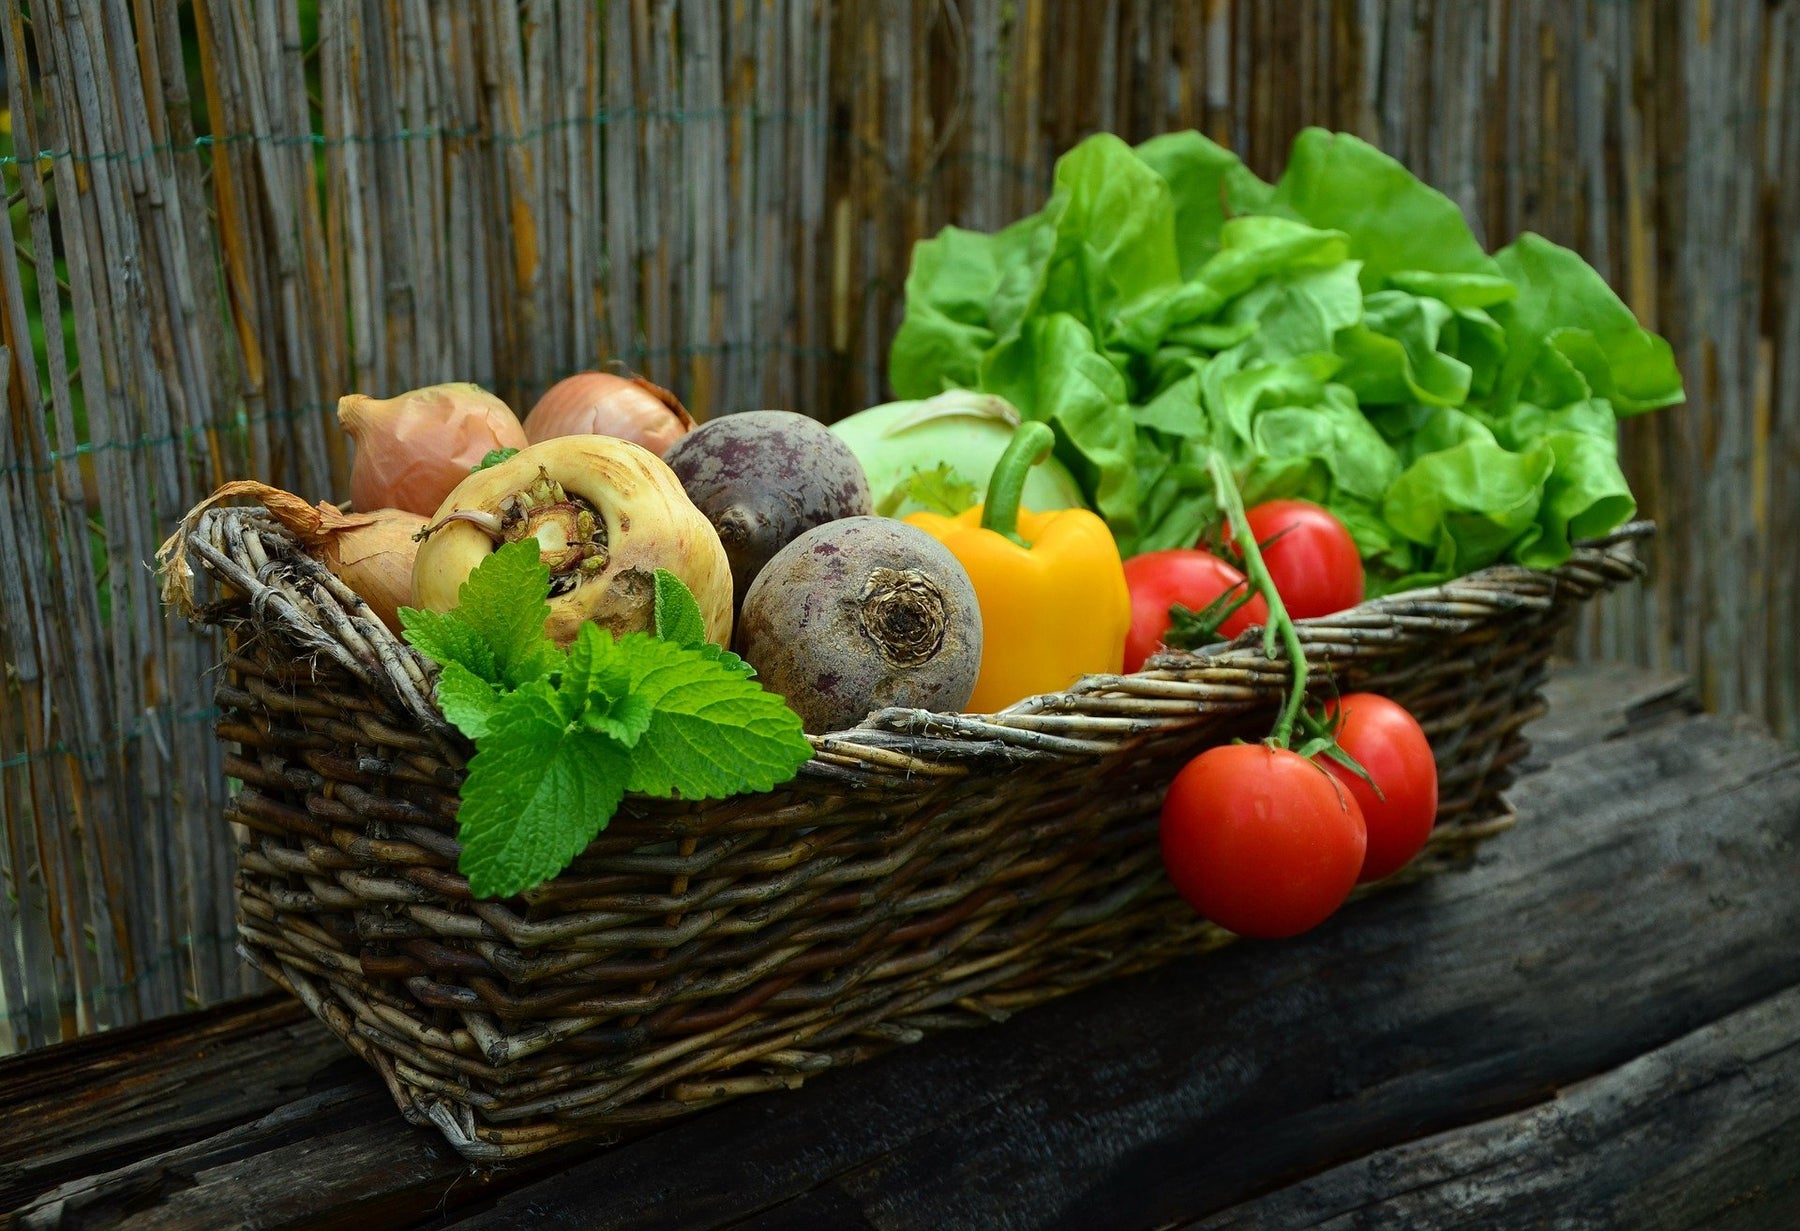 Basket full of vegetables, including tomato and bell papers